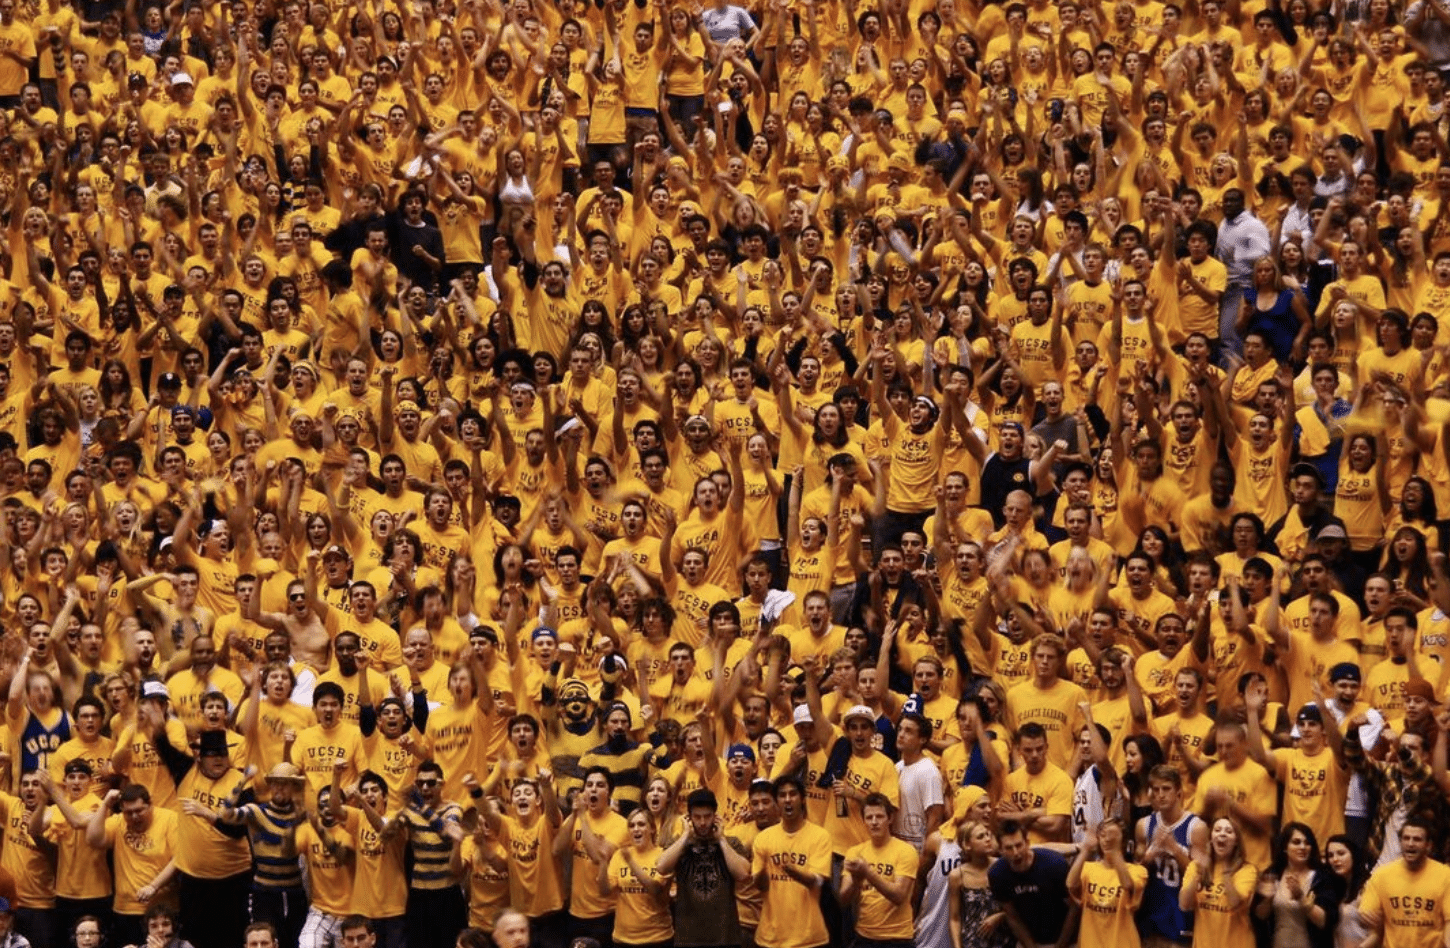 The Surge student section, dressed in vibrant yellow, fills the bleachers, standing united and cheering passionately at the event.